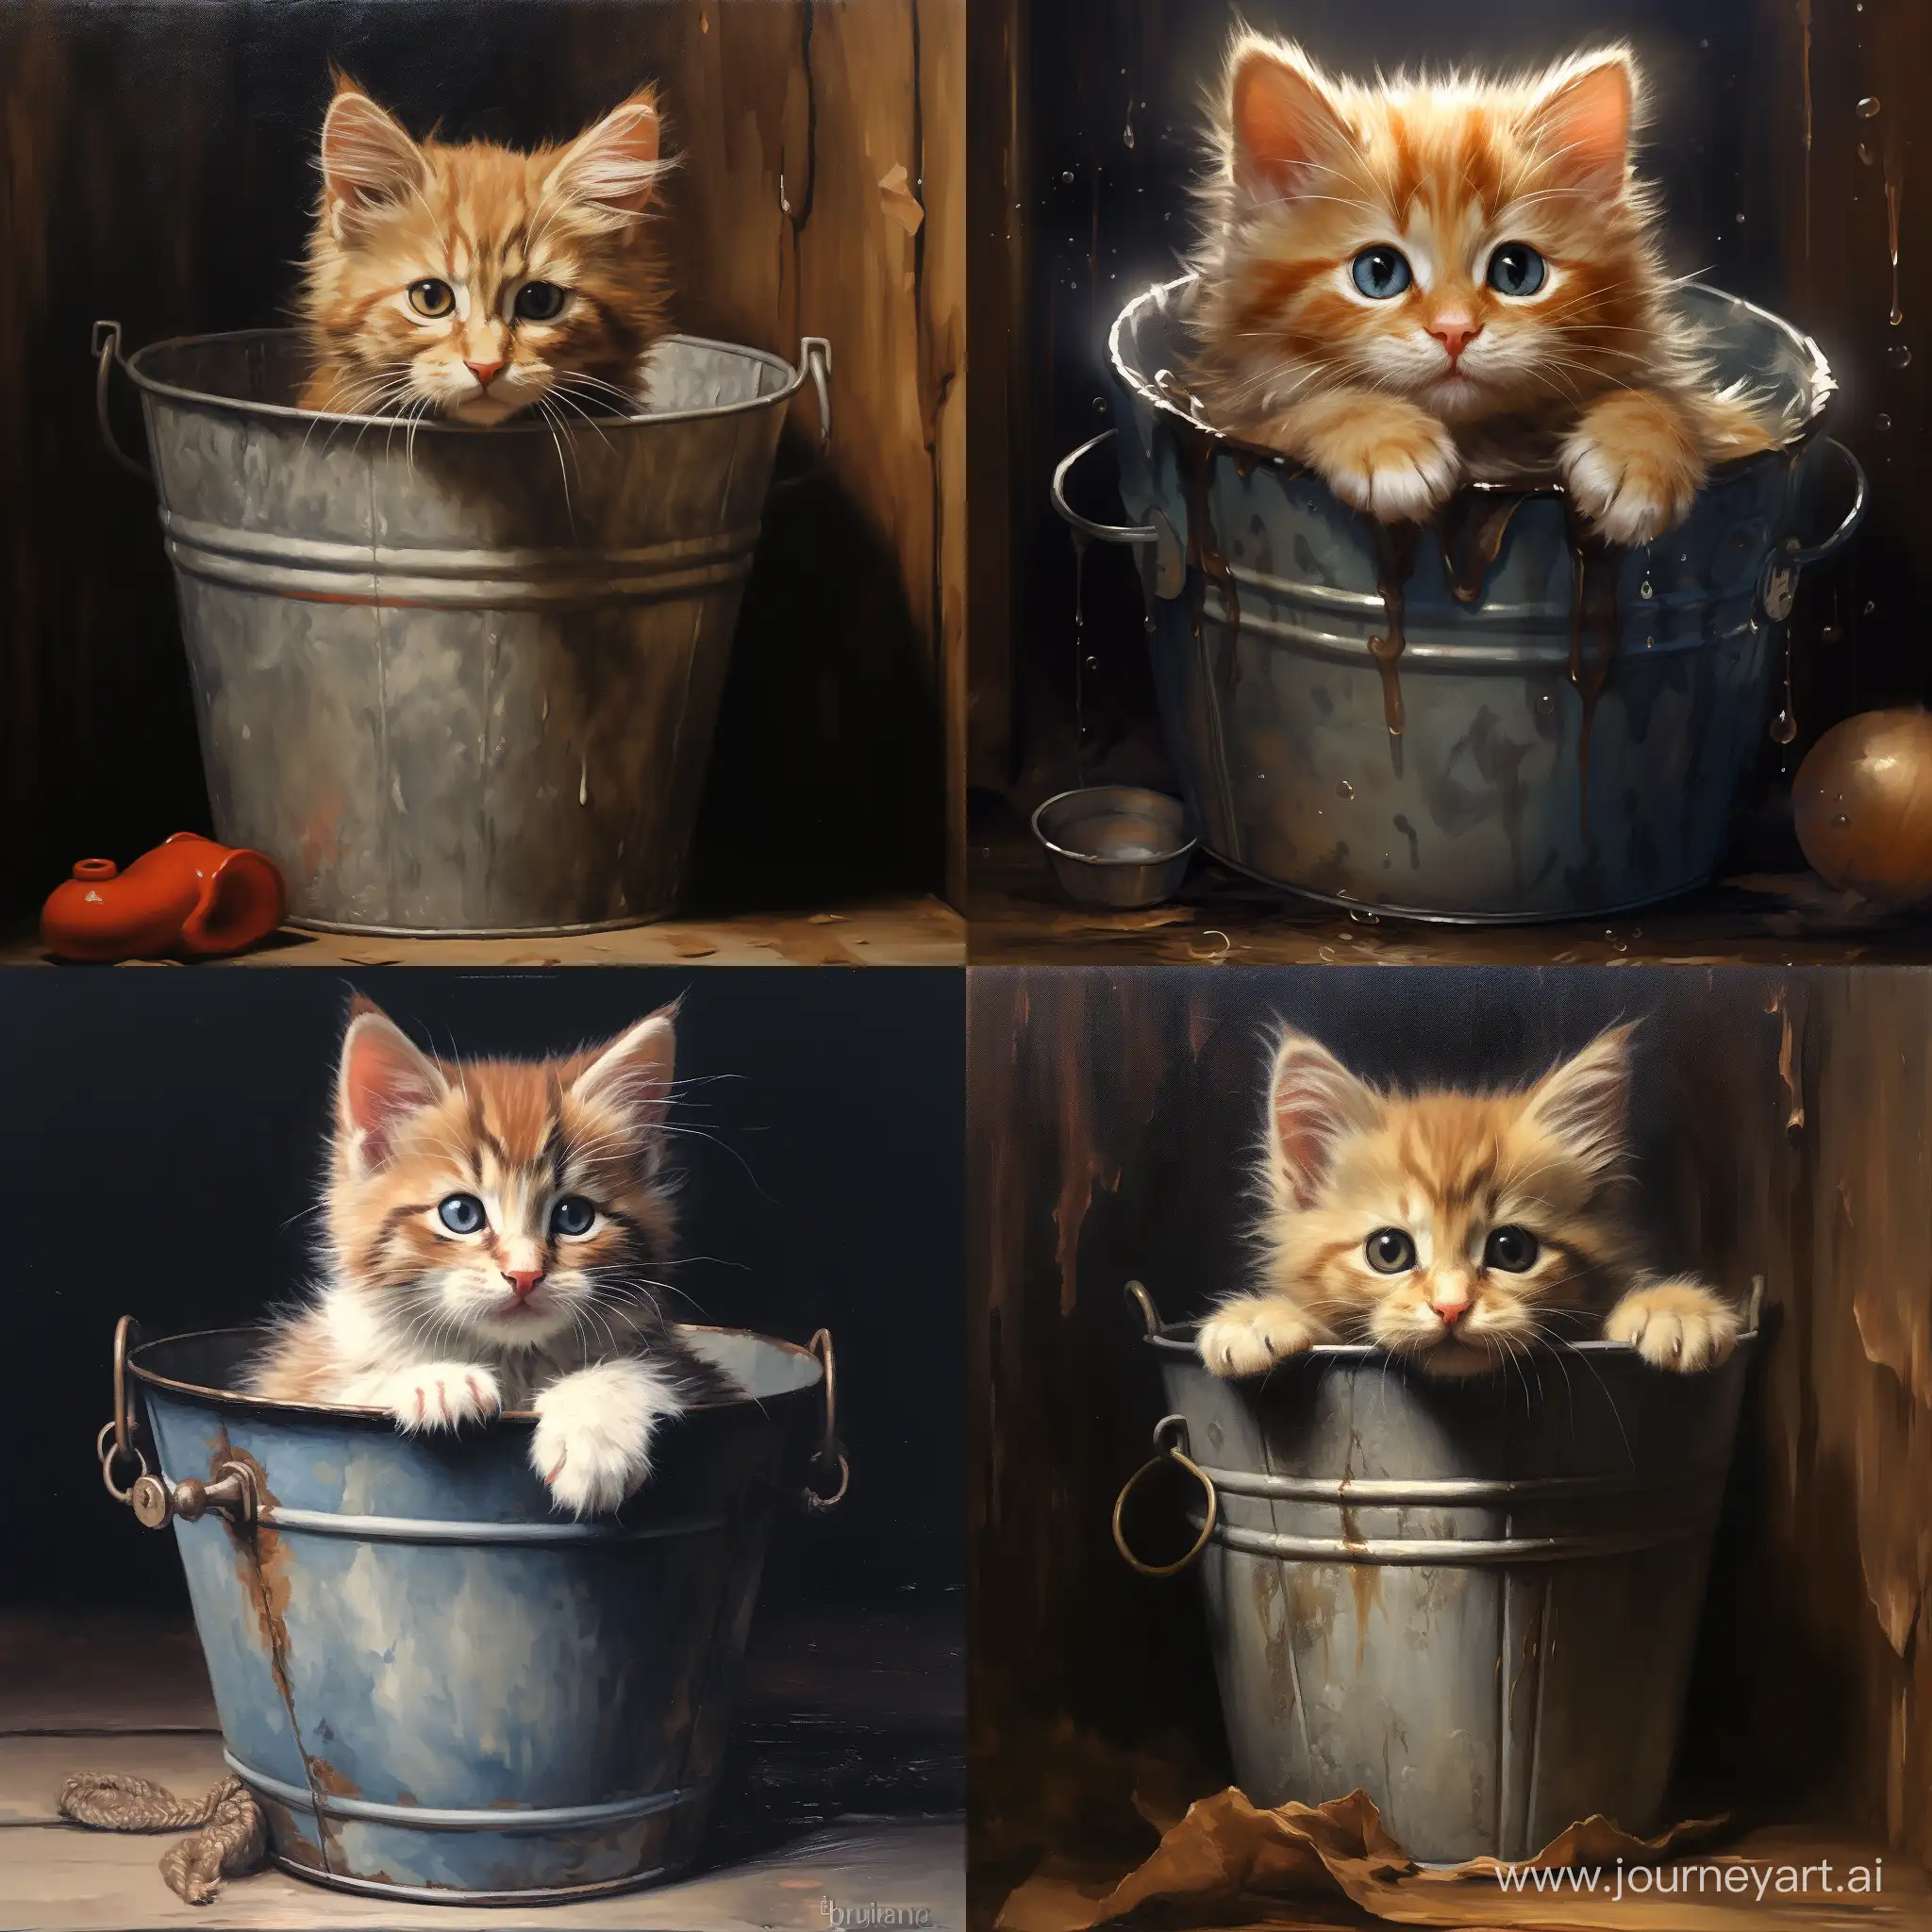 Adorable-Cat-Curled-Up-in-a-Colorful-Bucket